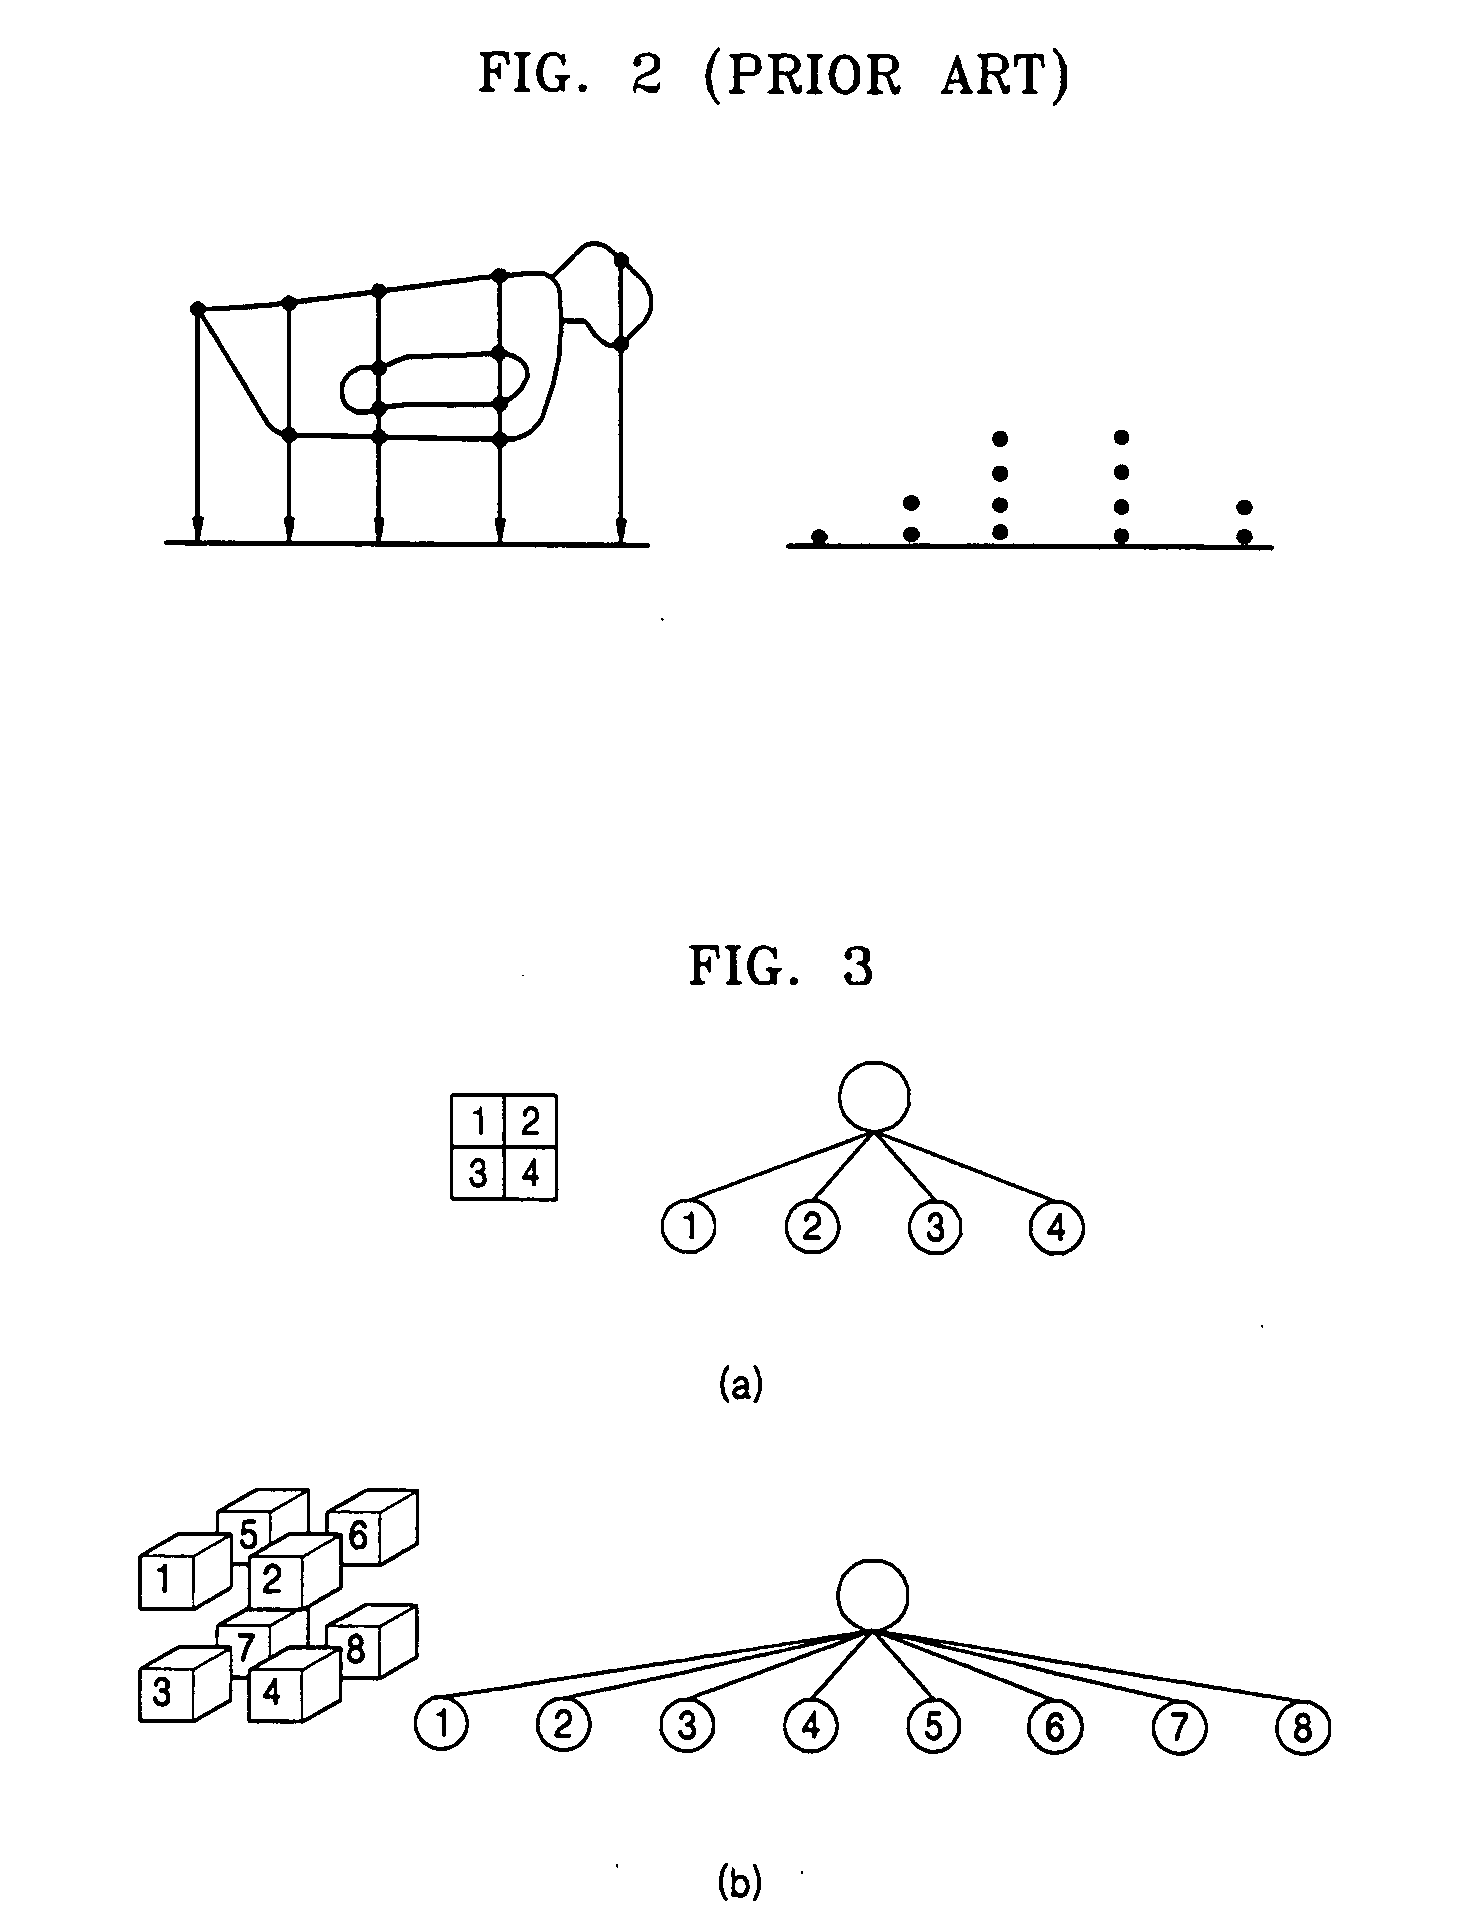 Adaptive 2n-ary tree generating method, and method and apparatus for encoding and decoding 3D volume data using it